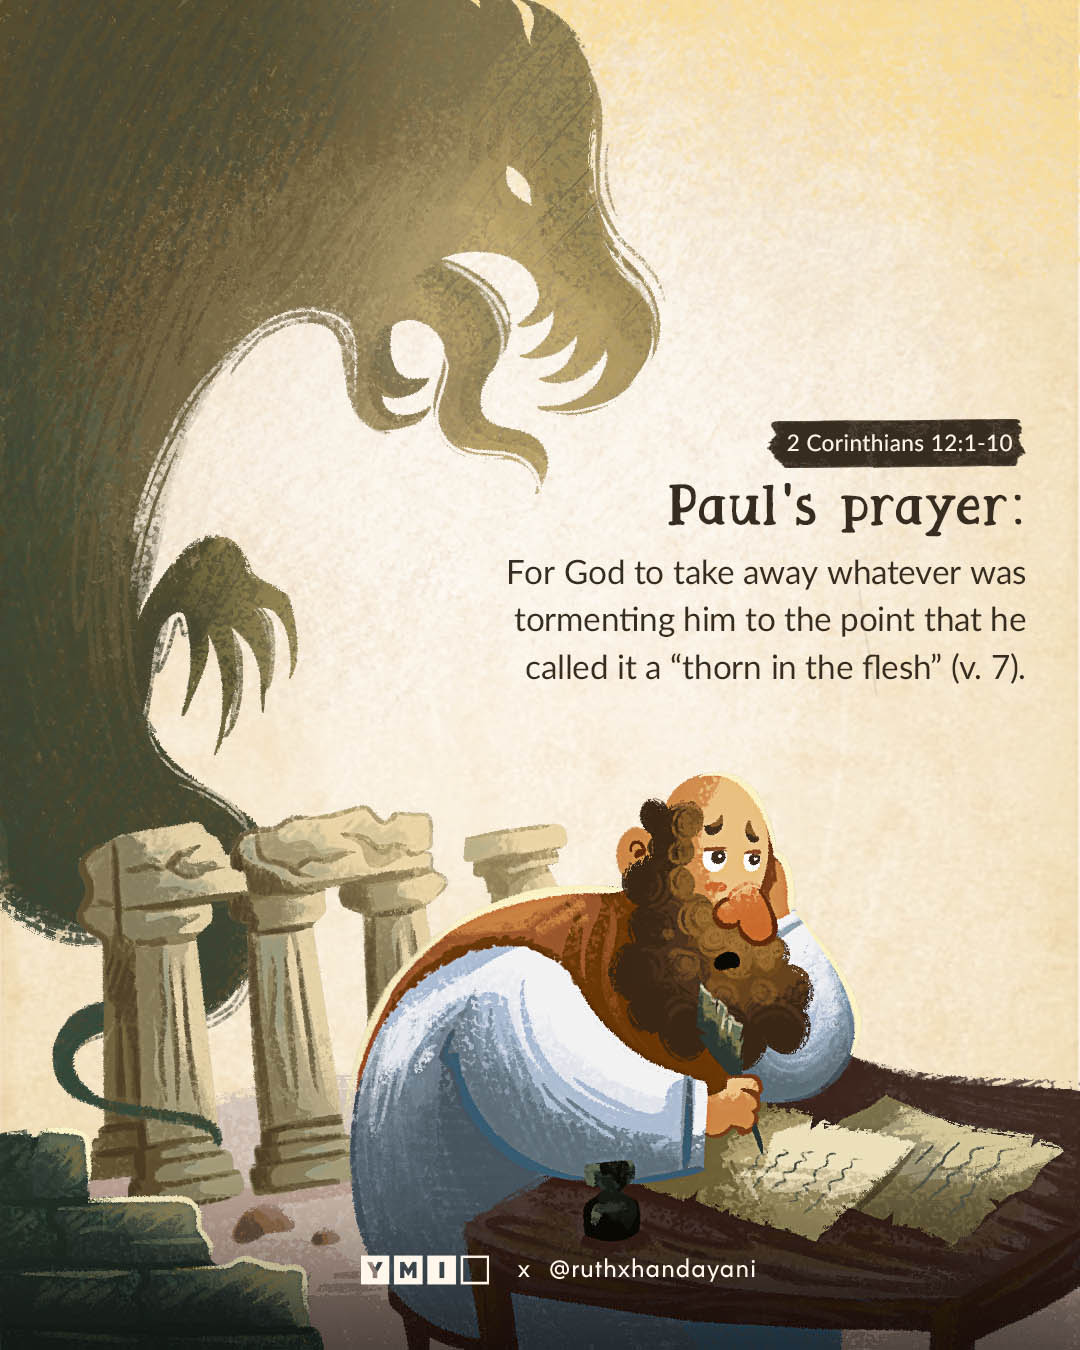 Paul praying with menacing shadow on the background